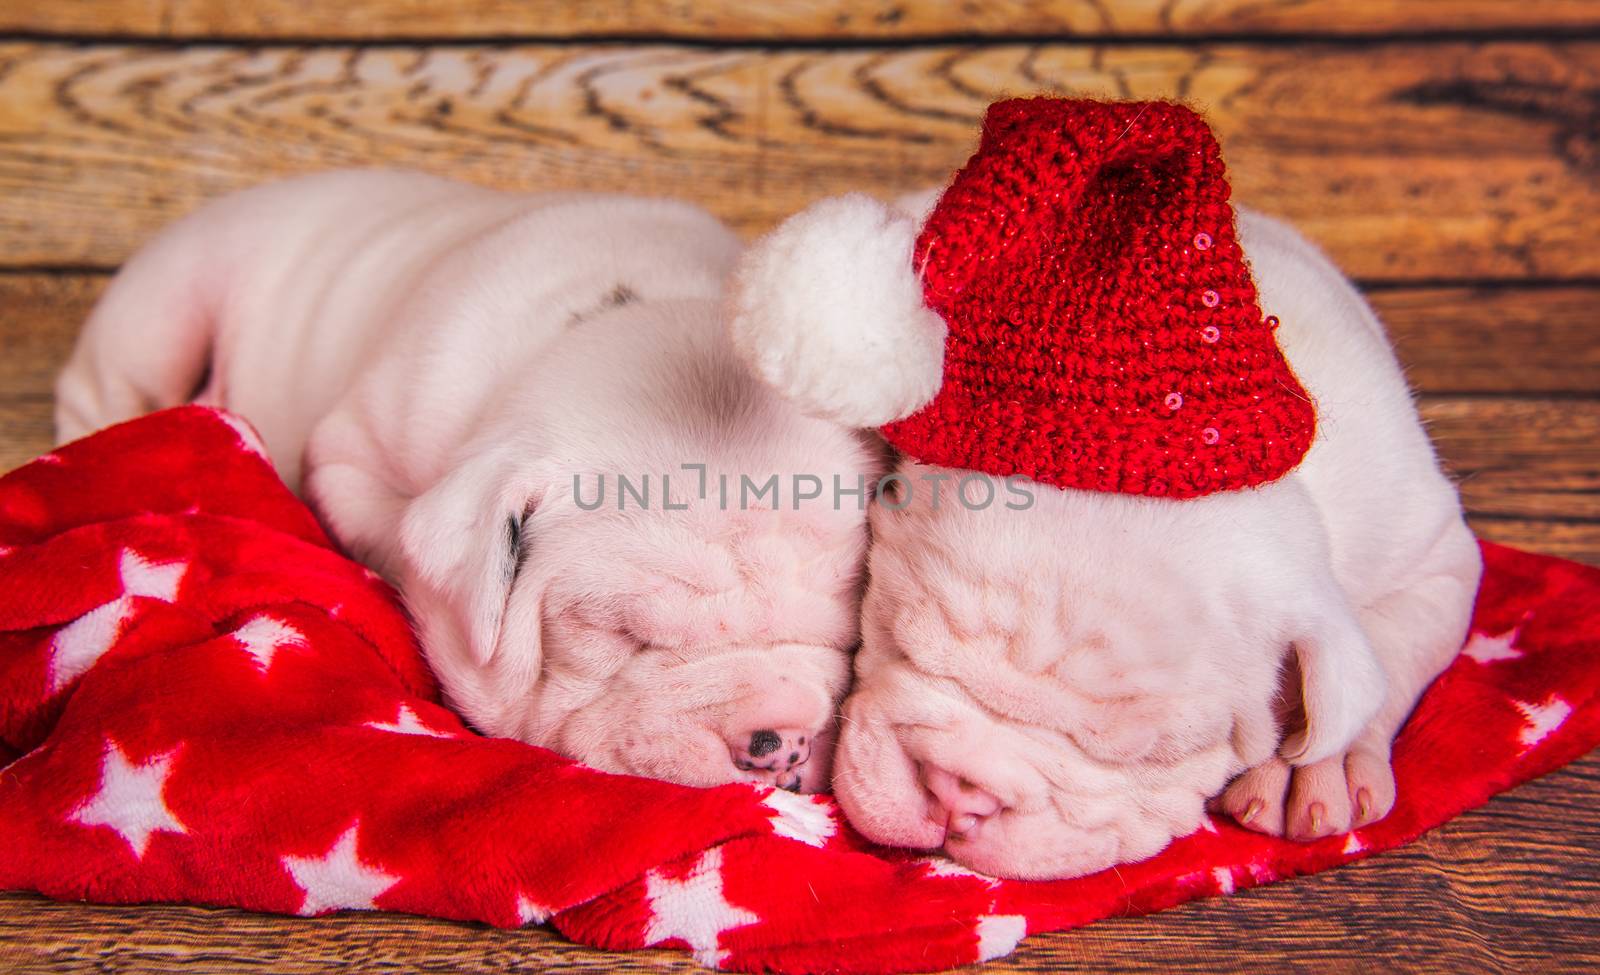 Two Funny American Bulldog puppies dogs with santa claus hat are sleeping. Christmas or New Year background